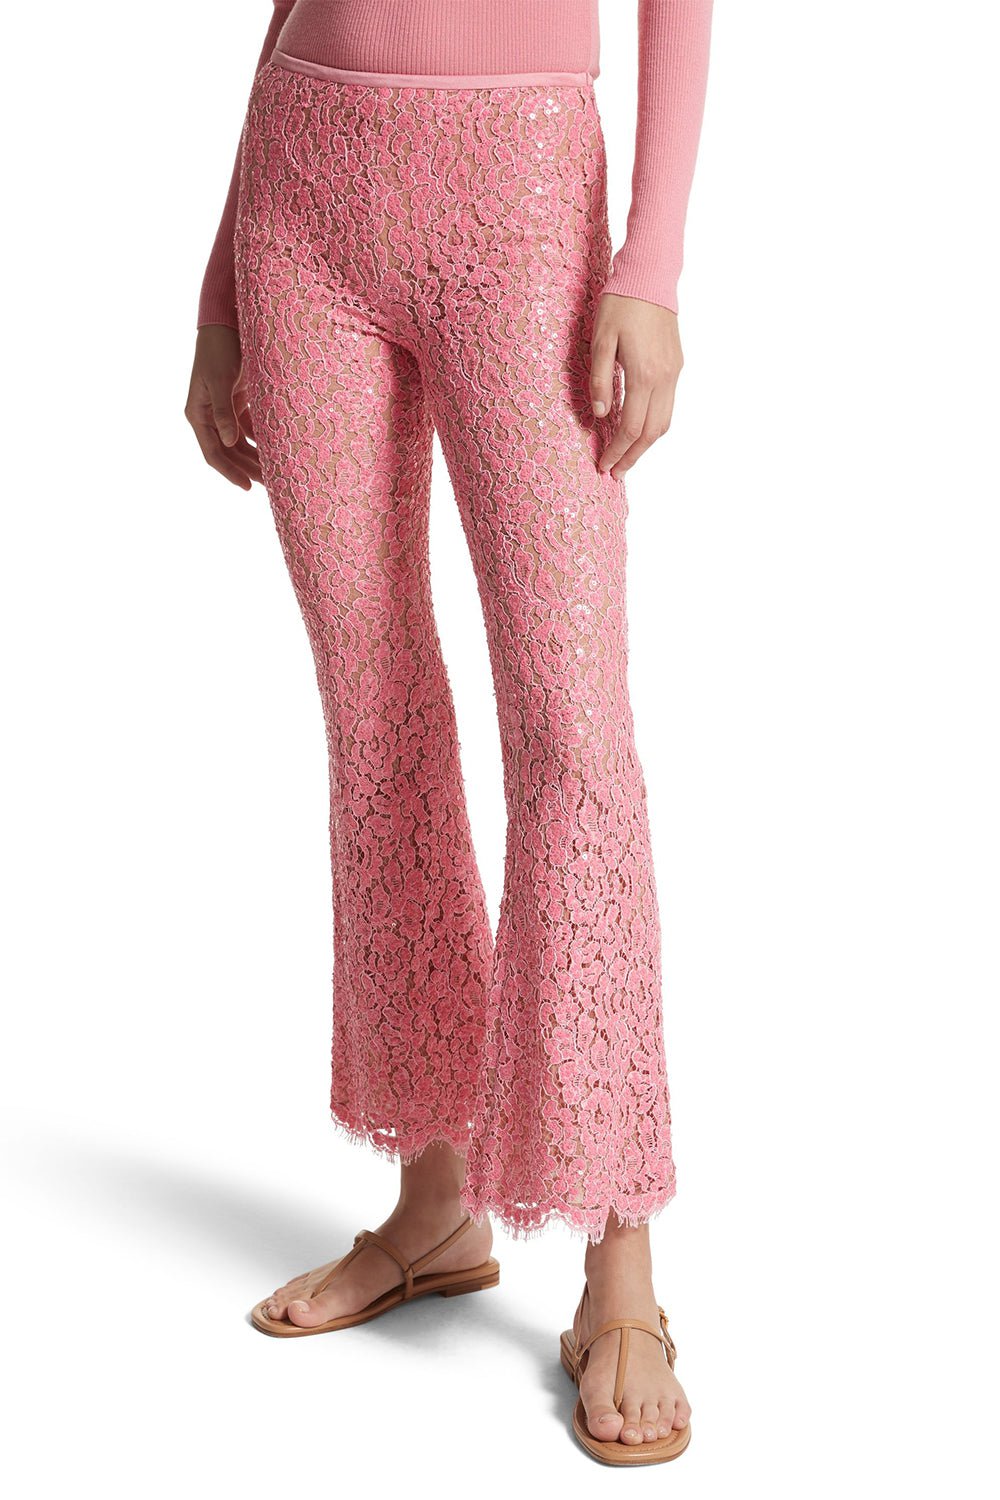 Embroidered Cropped Pants CLOTHINGPANTCROPPED MICHAEL KORS COLLECTION   